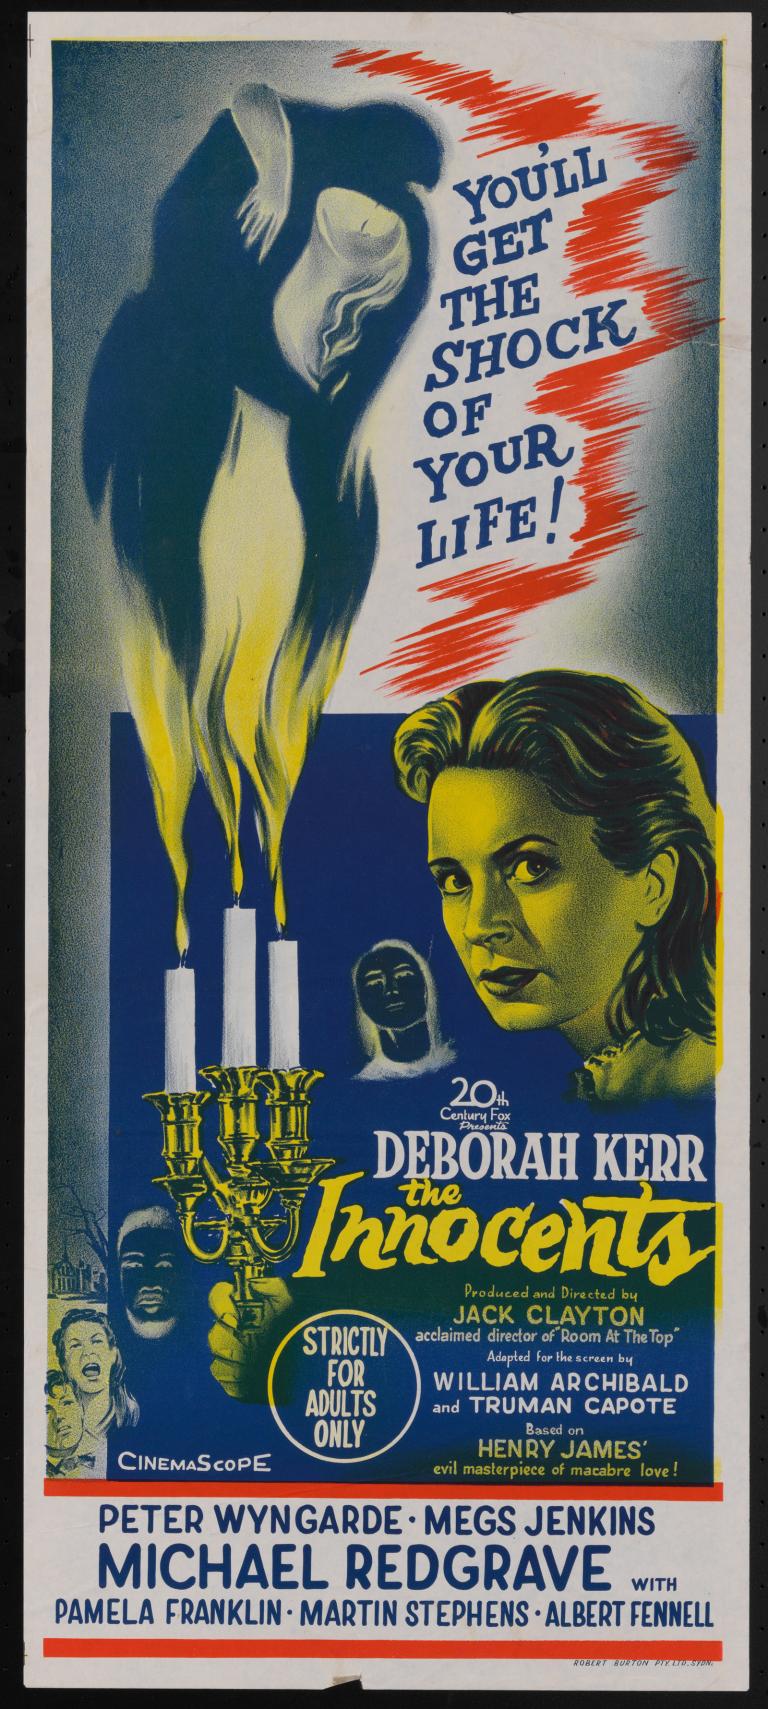 Movie poster for a film titled The Innocents showing a woman holding a candelabra.